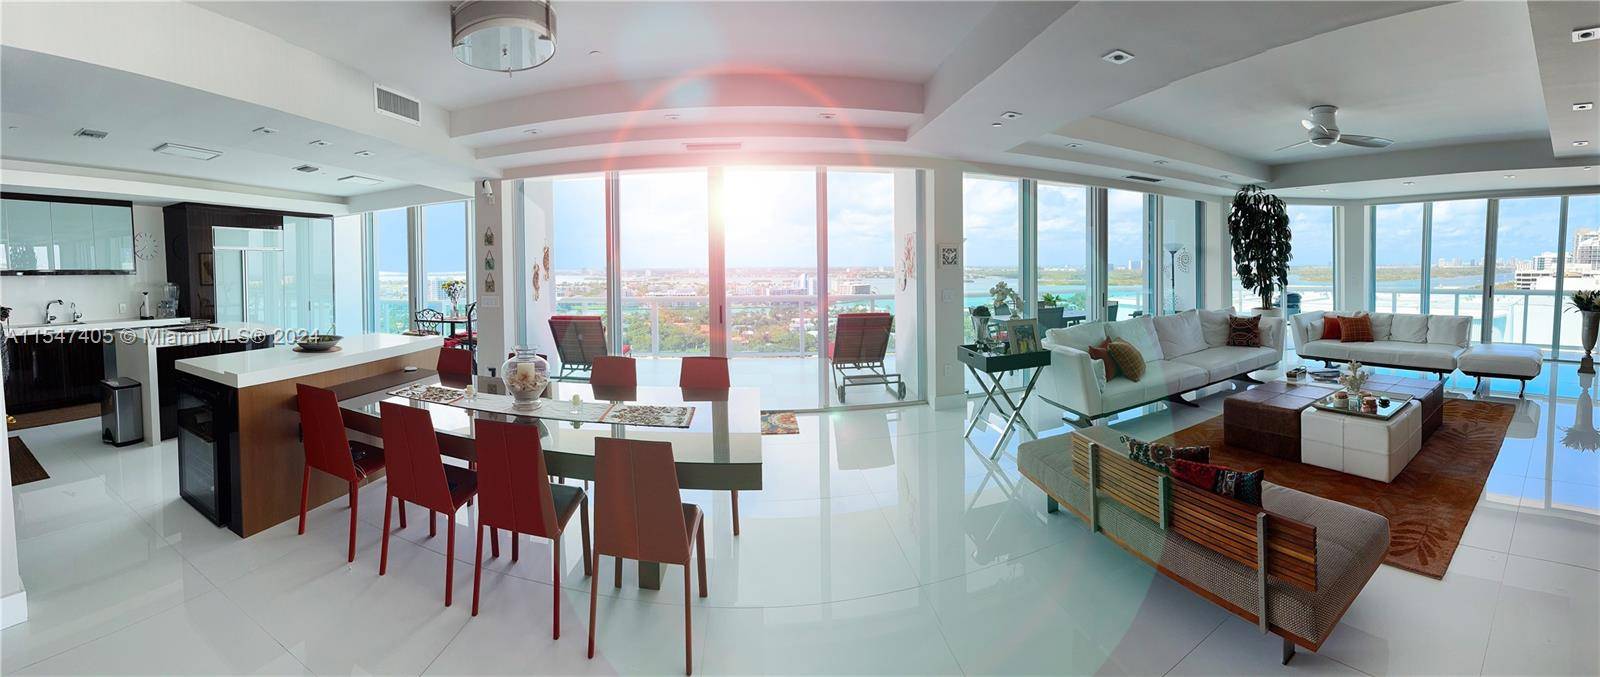 The wrap around balcony allows a spectacular view of the Ocean, the Bay, and the City with incredible Sunset.